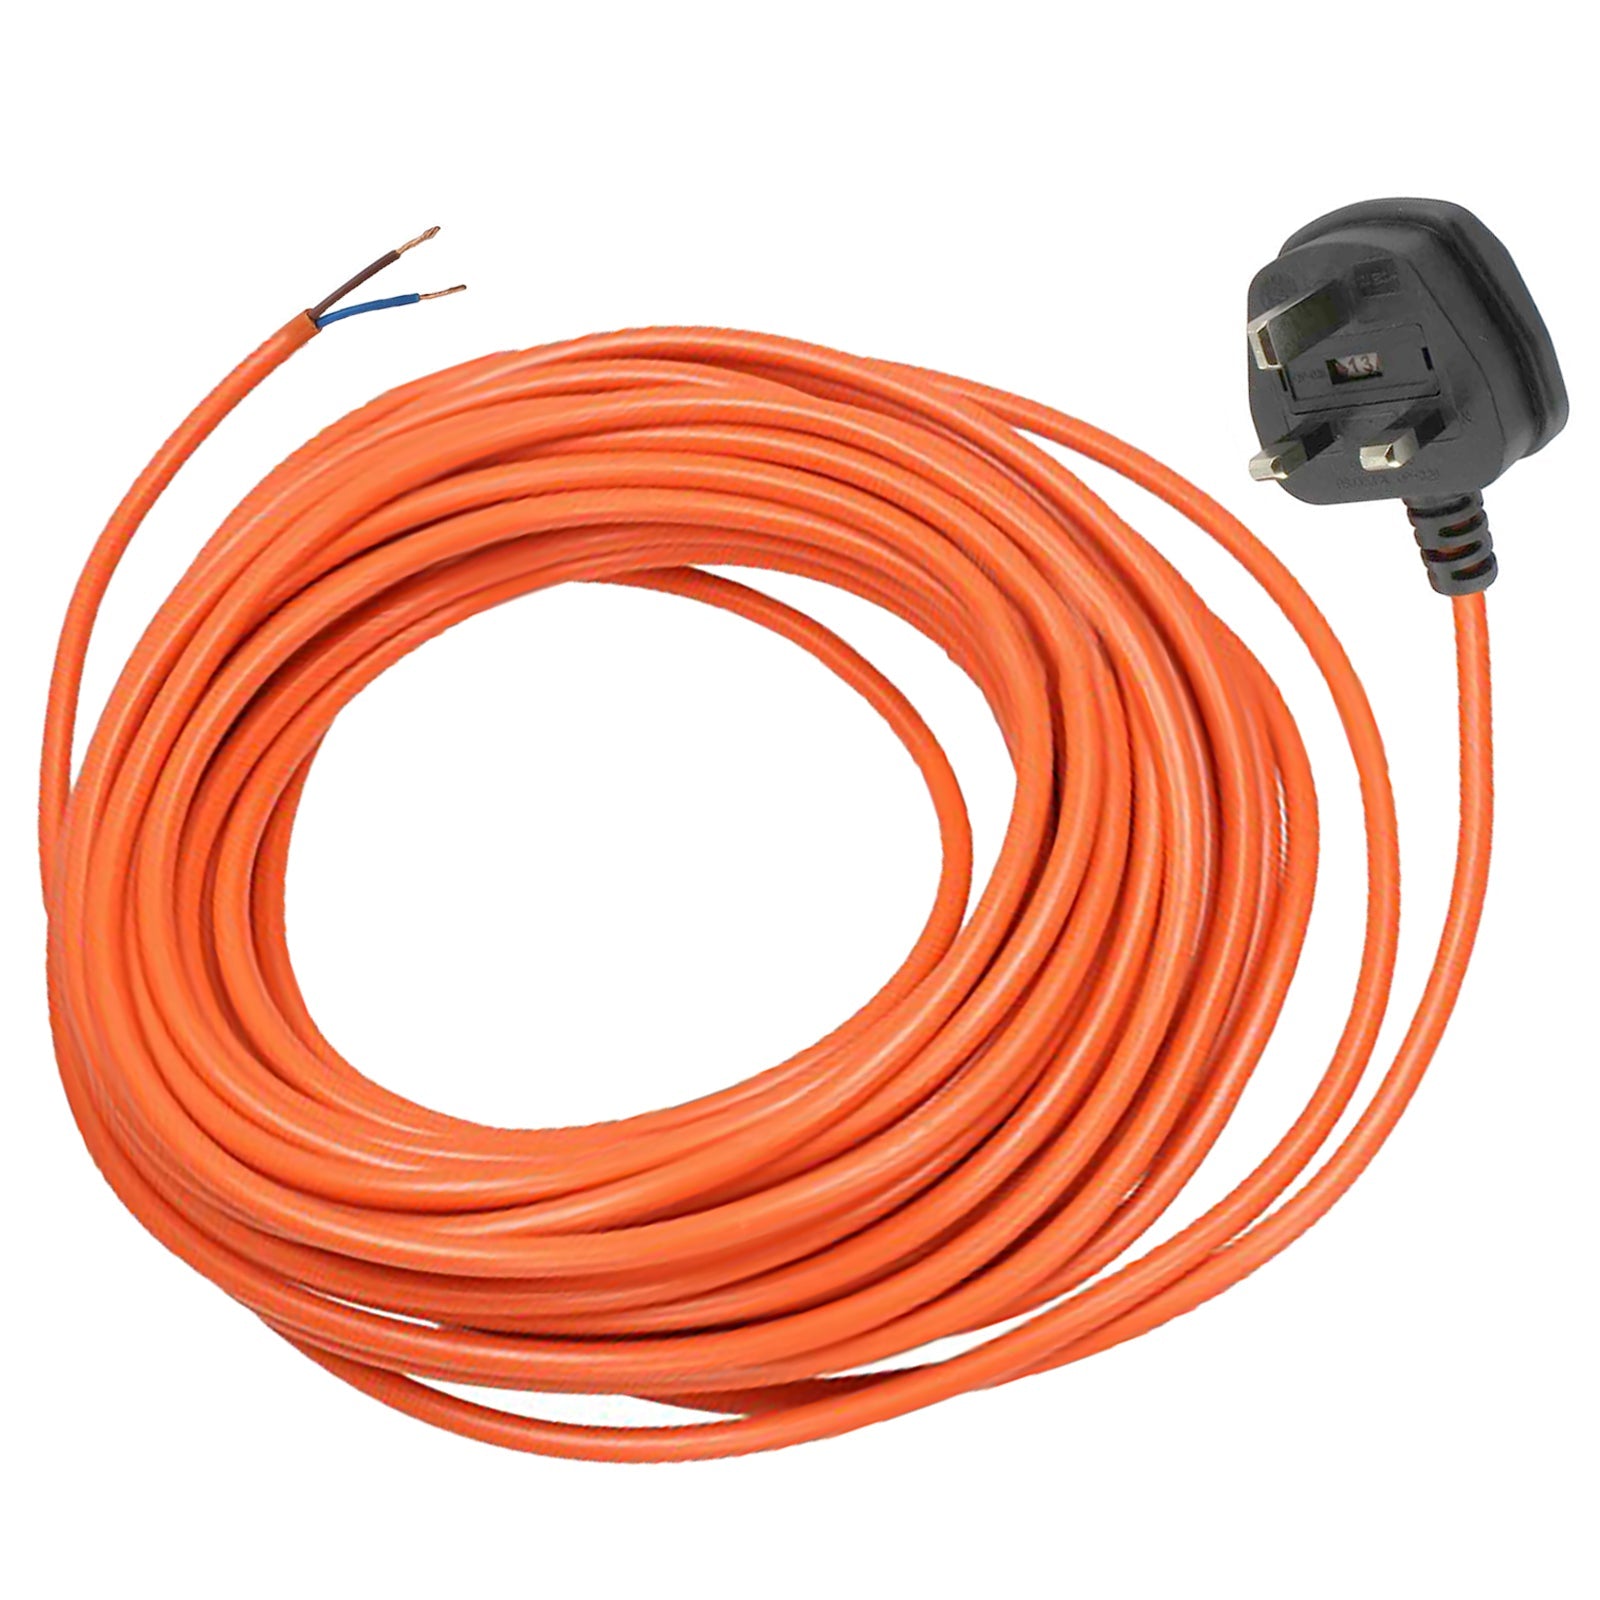 12m Power Cable For Flymo Hover Compact 300 330 350 Lawnmower Extra Long Lead